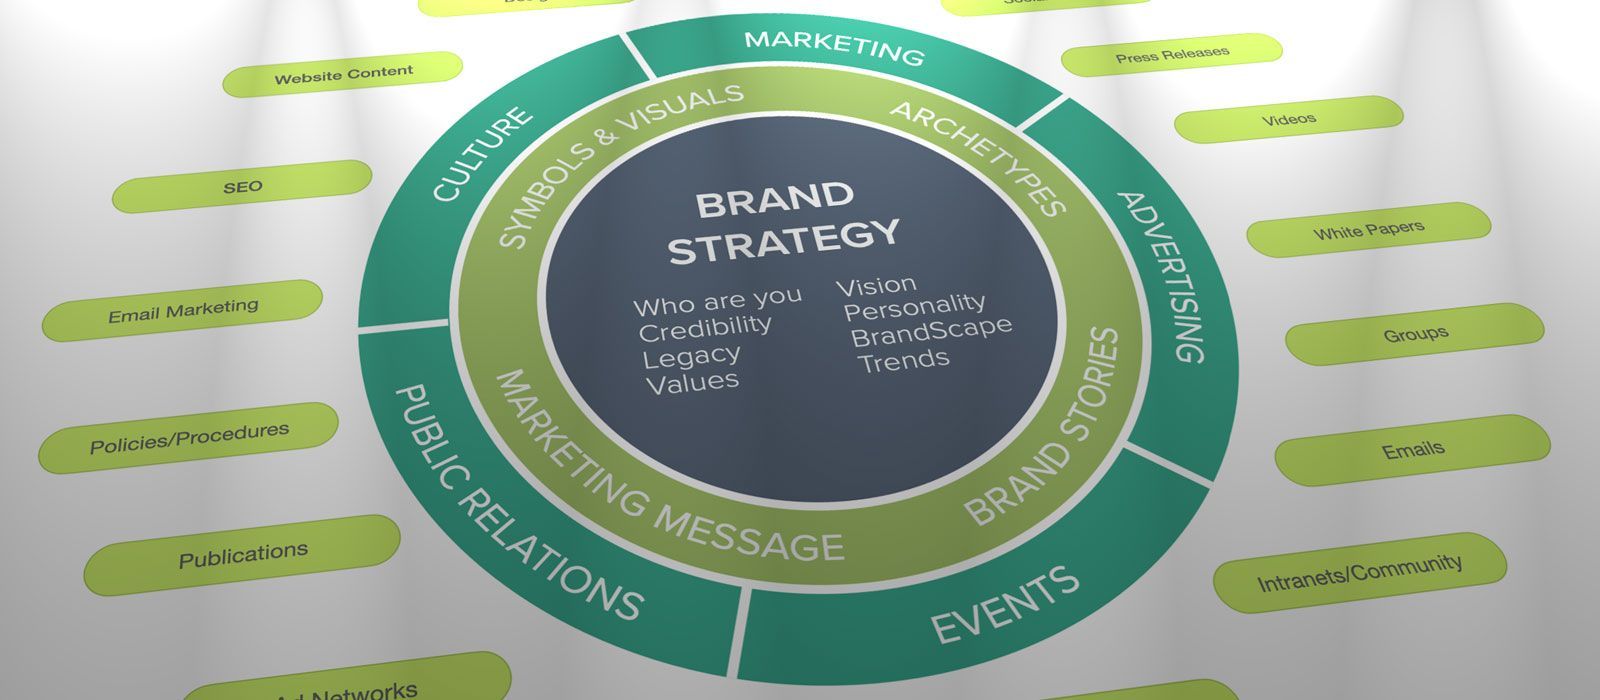 a diagram of a brand strategy is shown